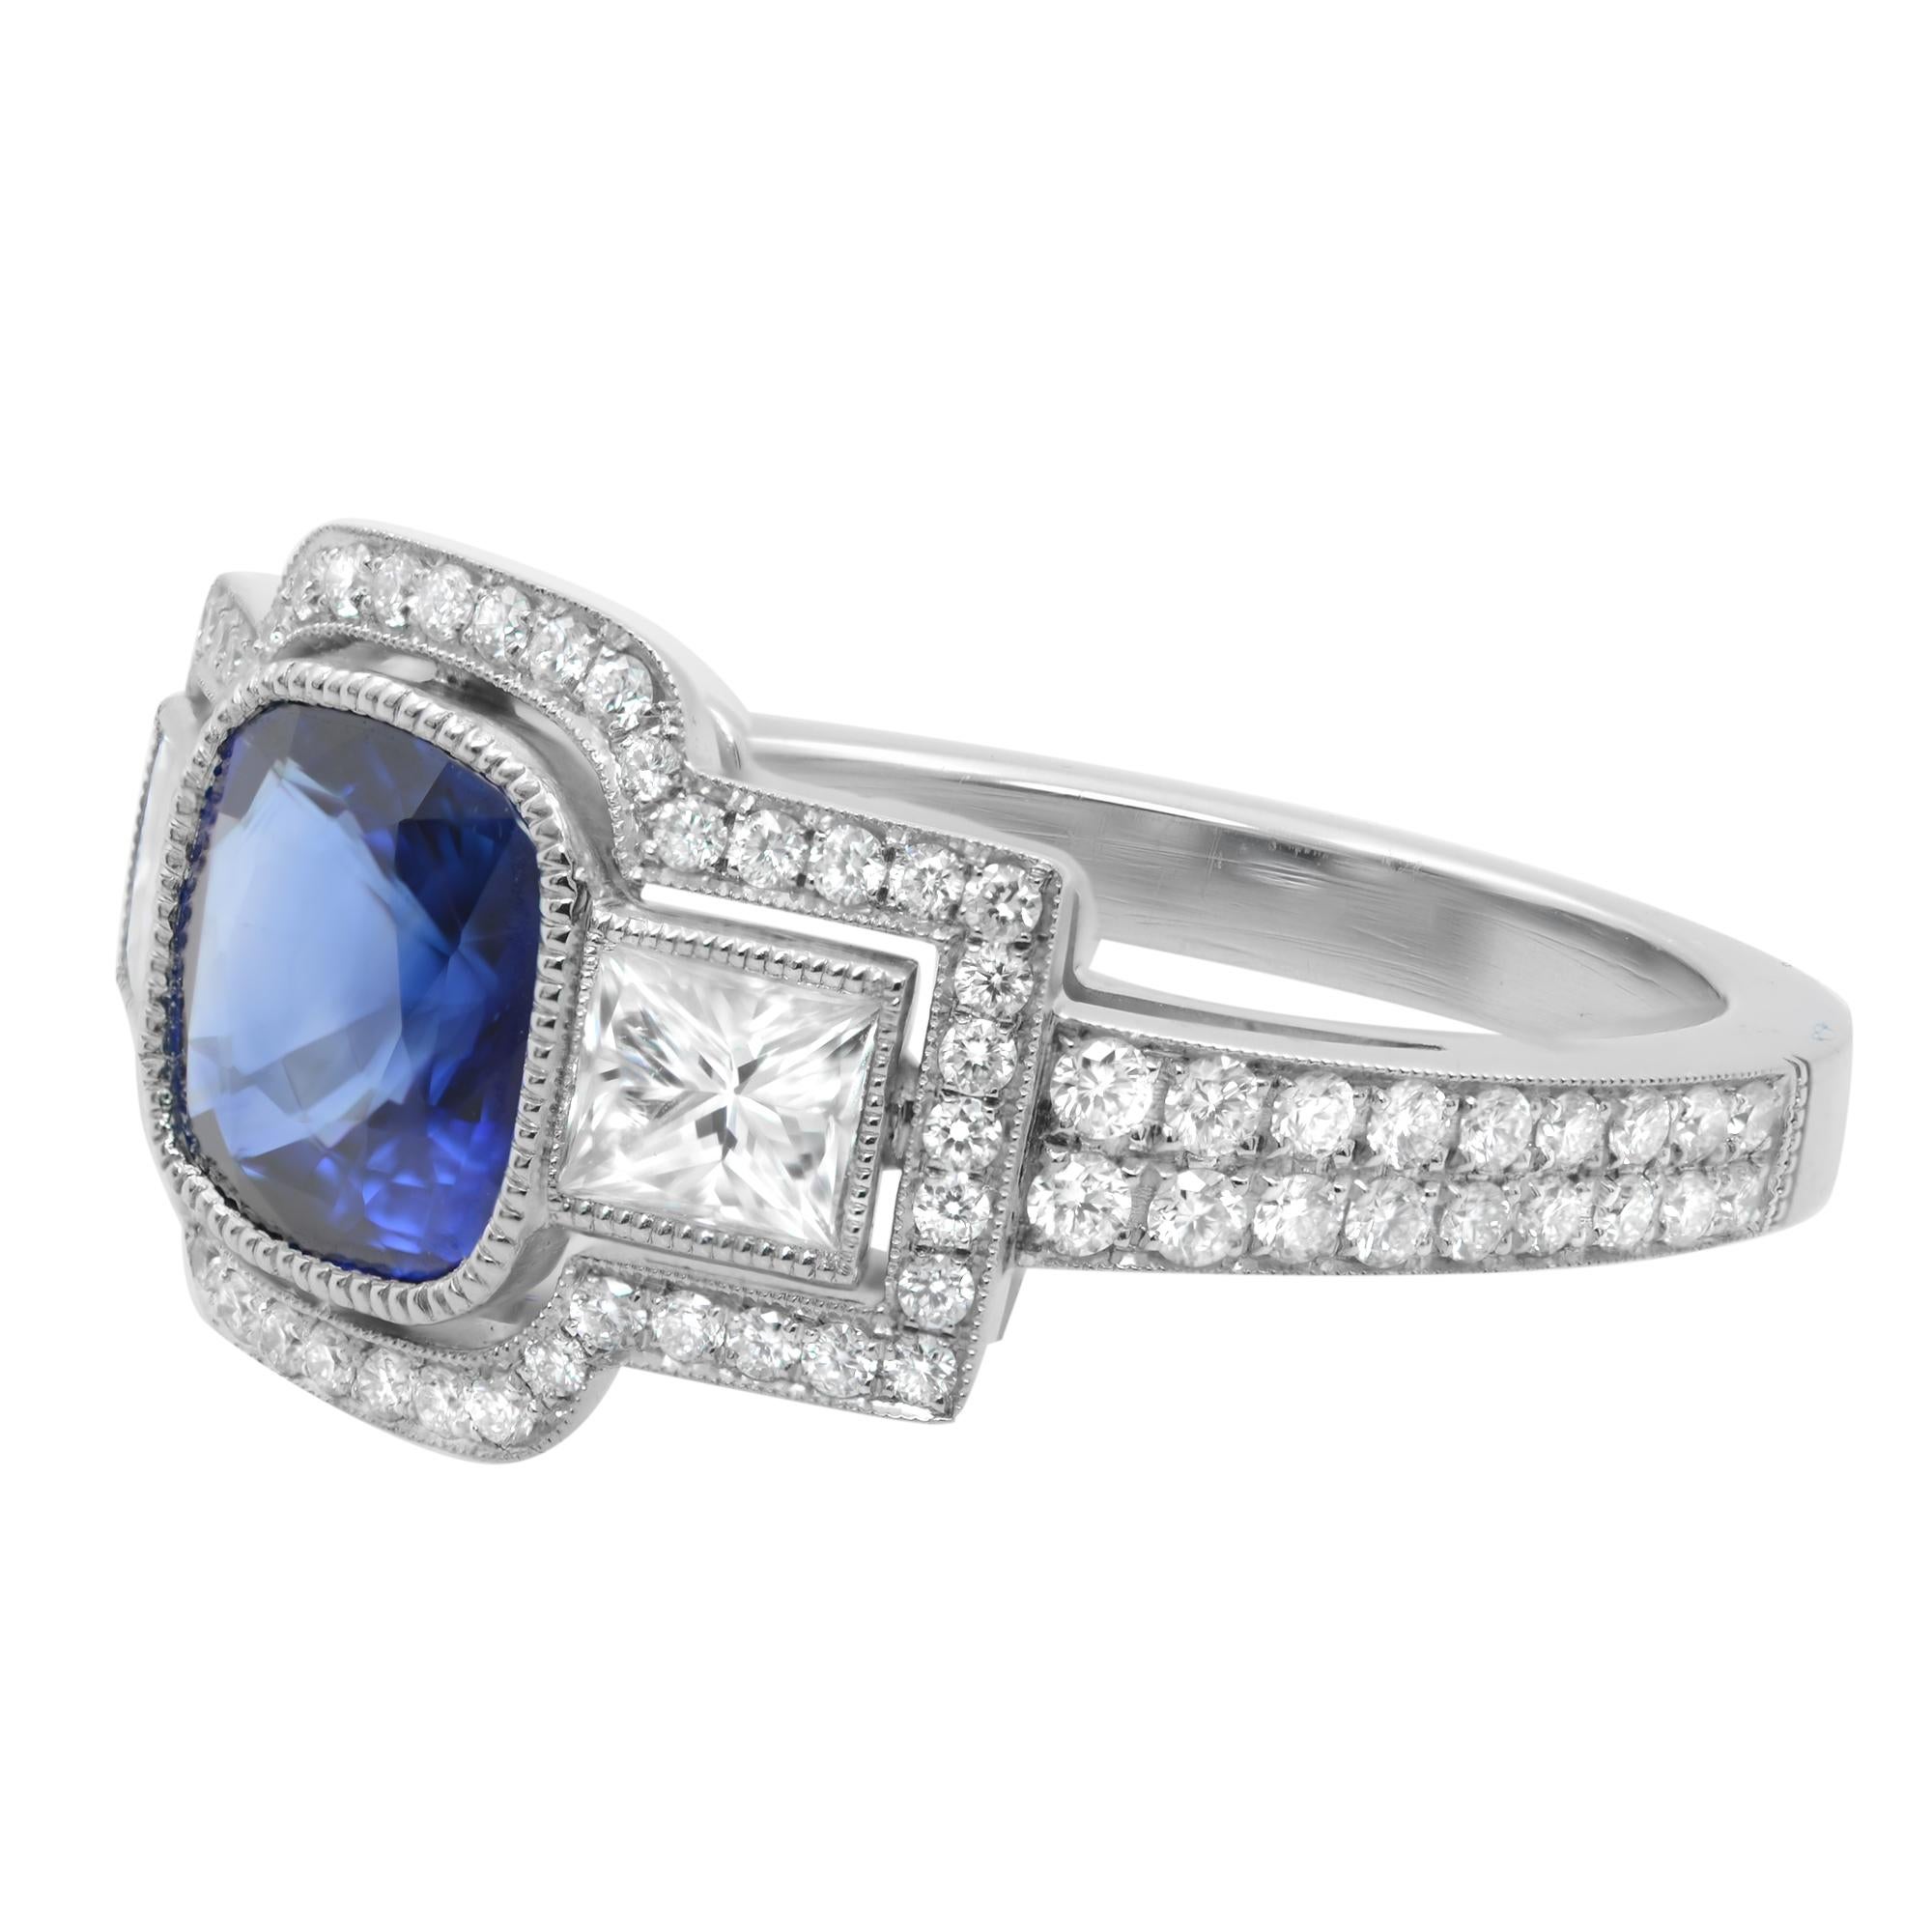 A darling and delicate, traditional style, newly made estate-style Blue Sapphire engagement ring crafted in platinum. The ring centers one bright pure Blue cushion cut Sapphire framed by the high polished bezel and flanked by a princess and round